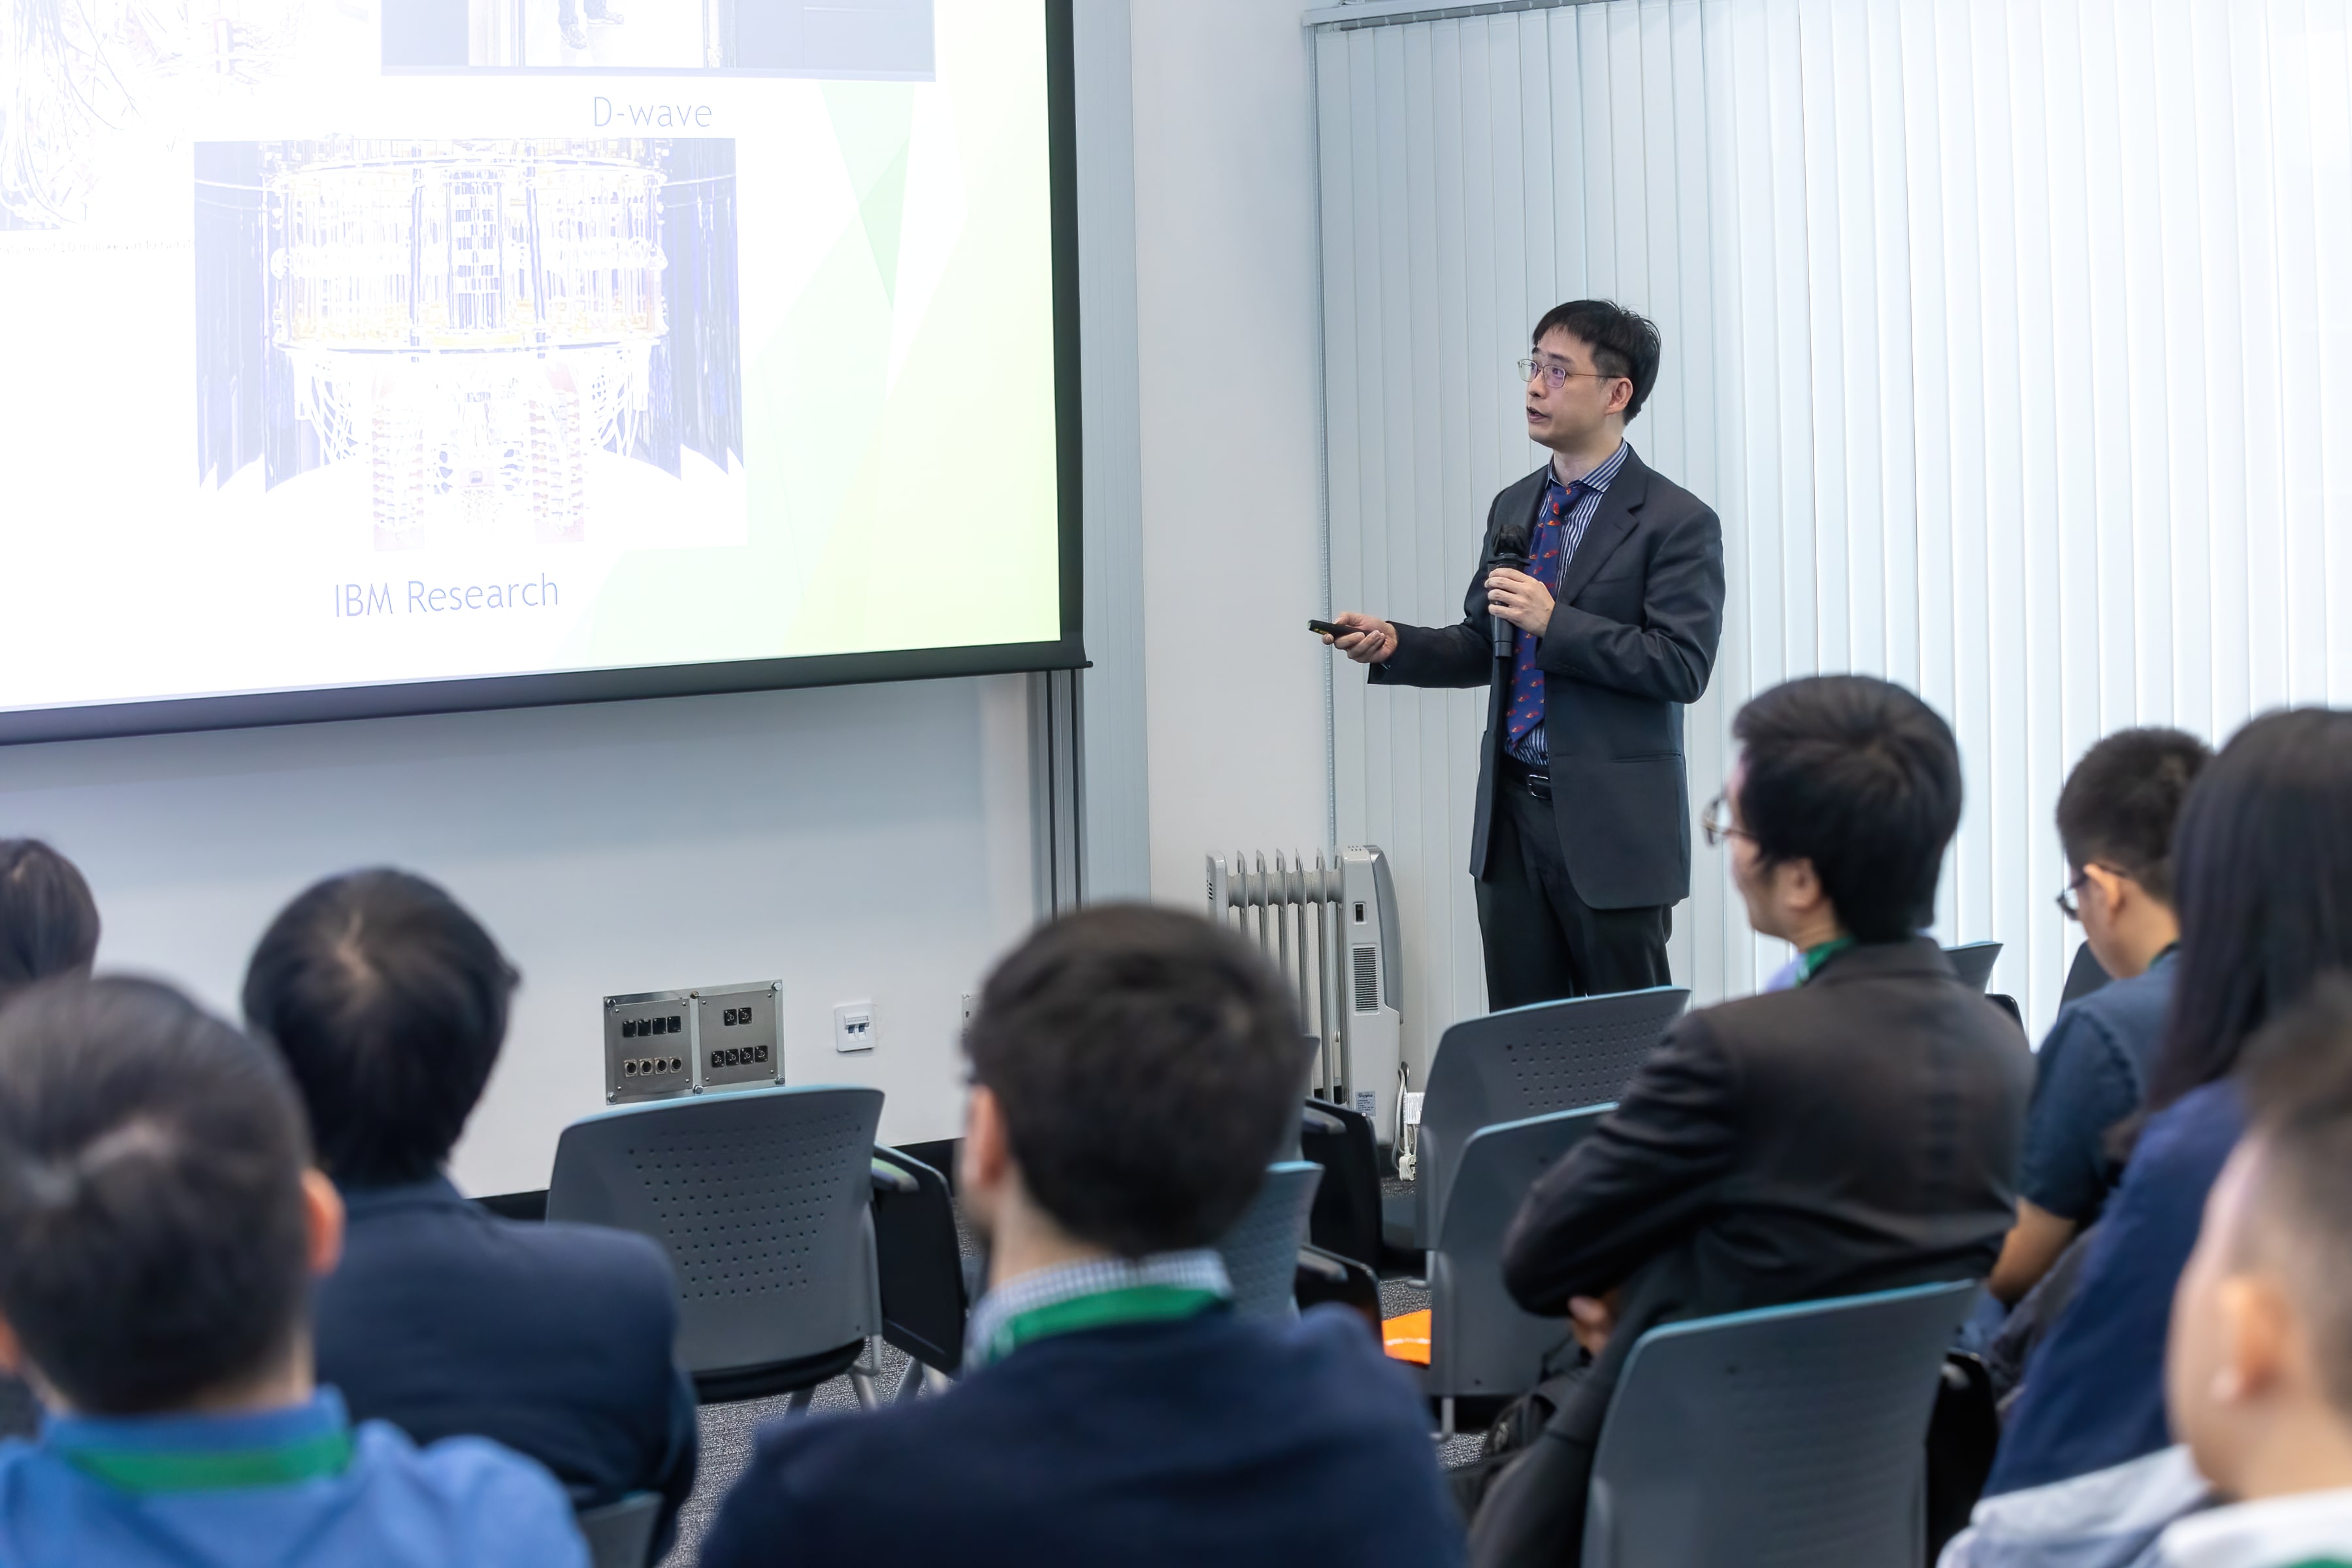 Prof. Jensen Li, Professor of Physics, shared his valuable insights on quantum physics, which sparked the interest of the young scientists and prompted them to pose thought-provoking questions.